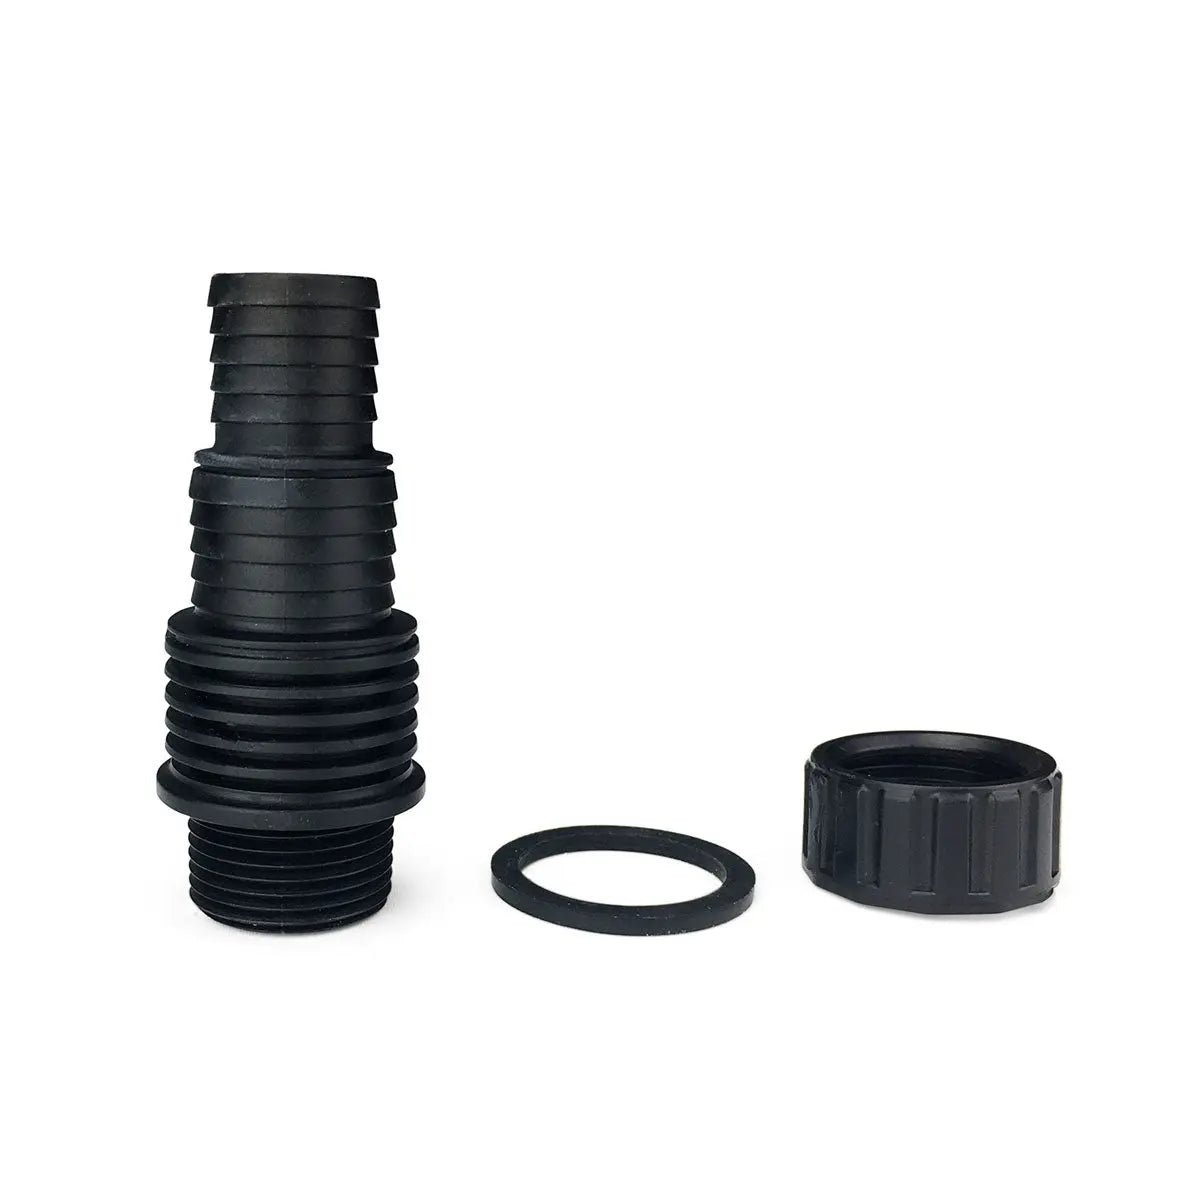 Aquascape Pond Waterfall Filter Fitting Kit - Land Supply Canada